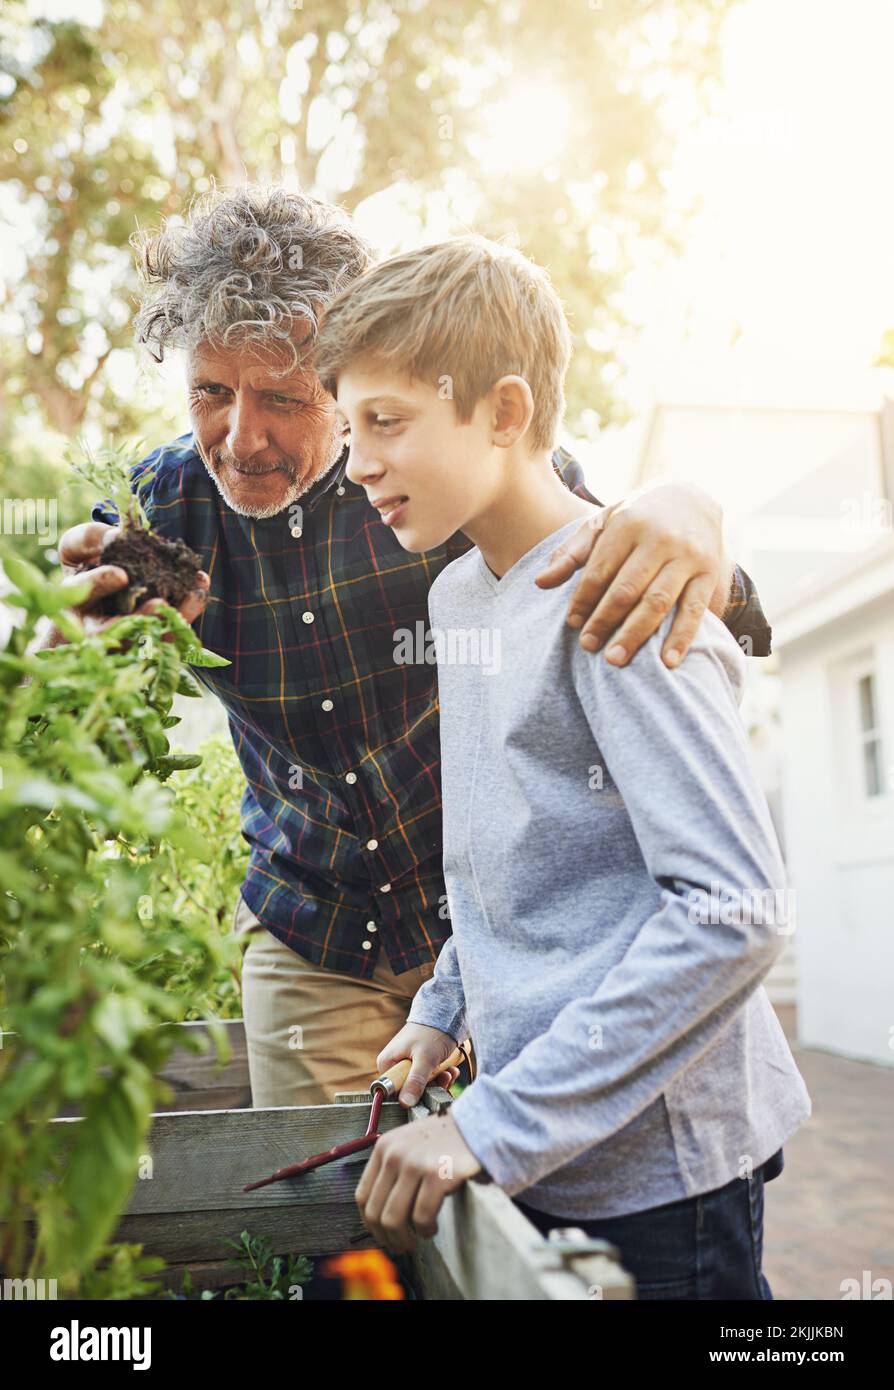 Sharing his love of gardening with his grandson. a grandfather teaching his grandson about gardening. Stock Photo